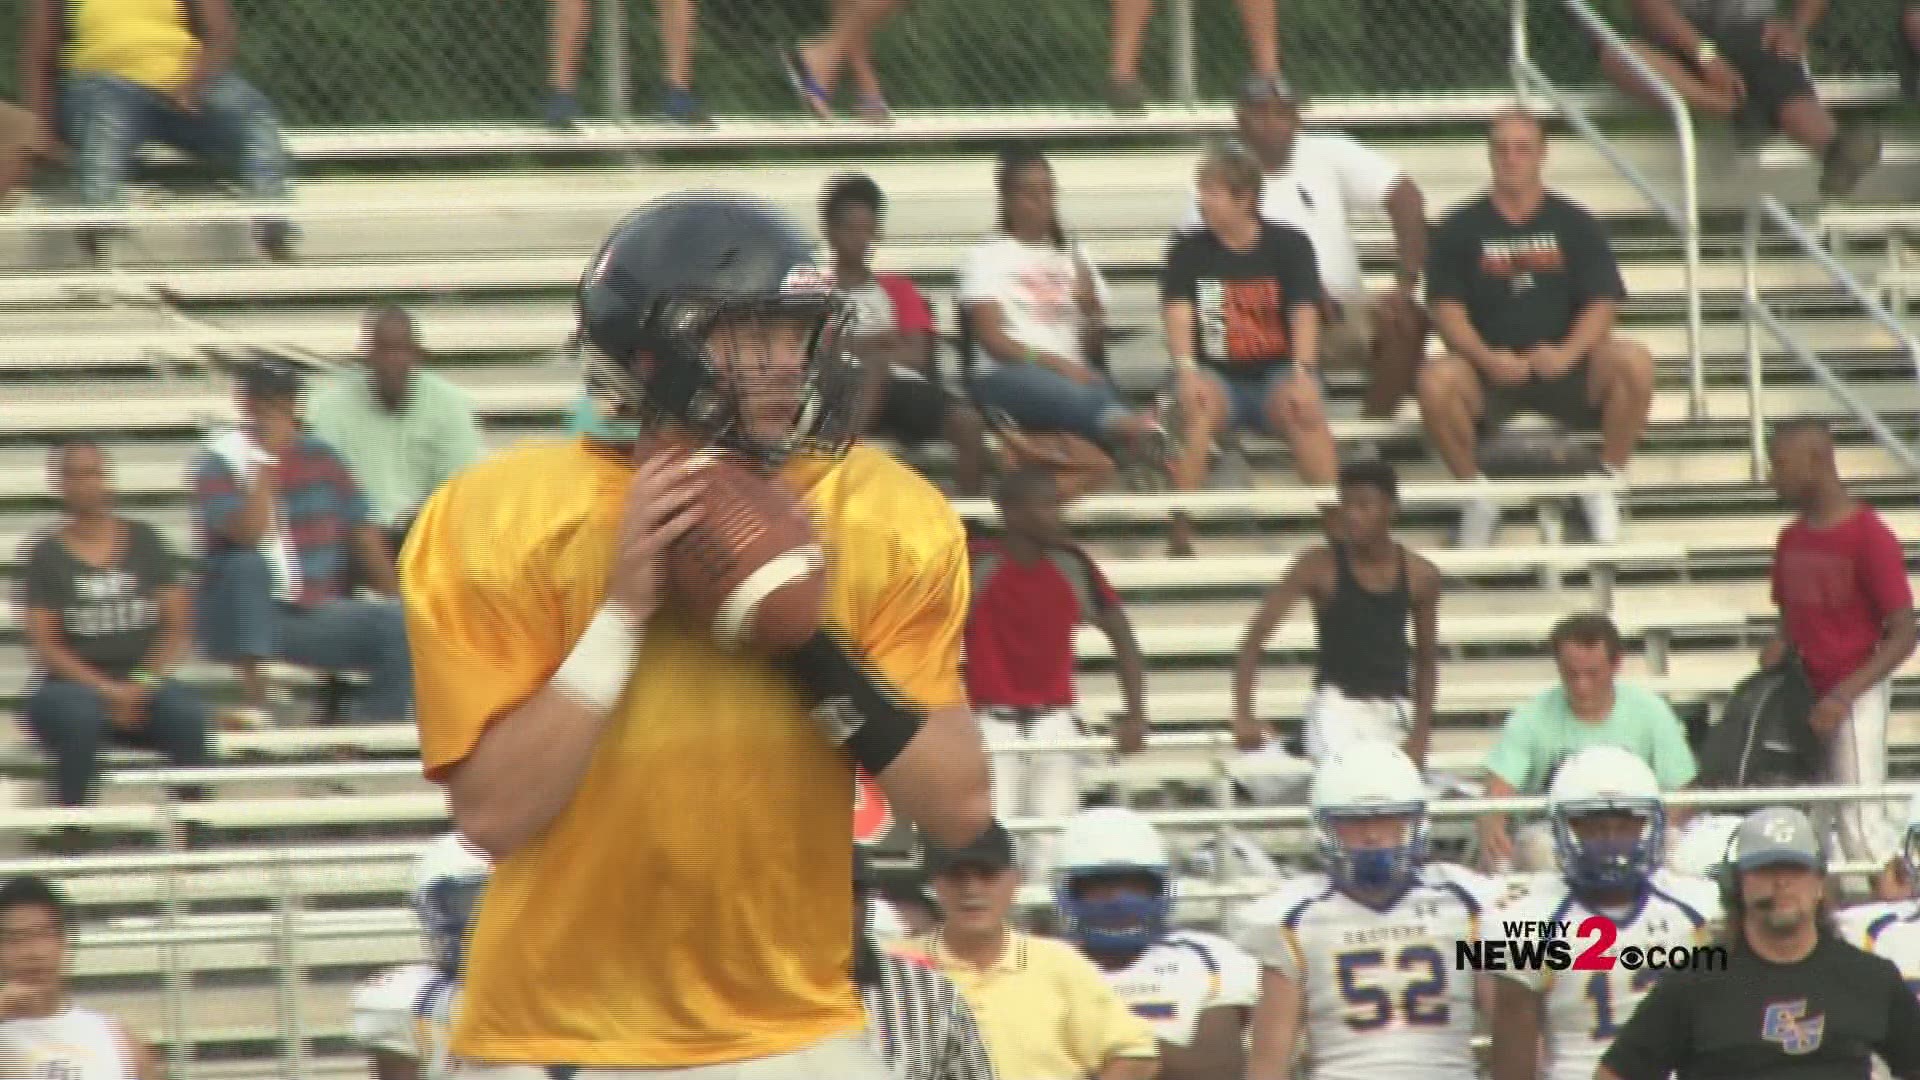 Eastern Guilford and Western Alamance matched up in a preseason football jamboree at Reidsville High School Friday.